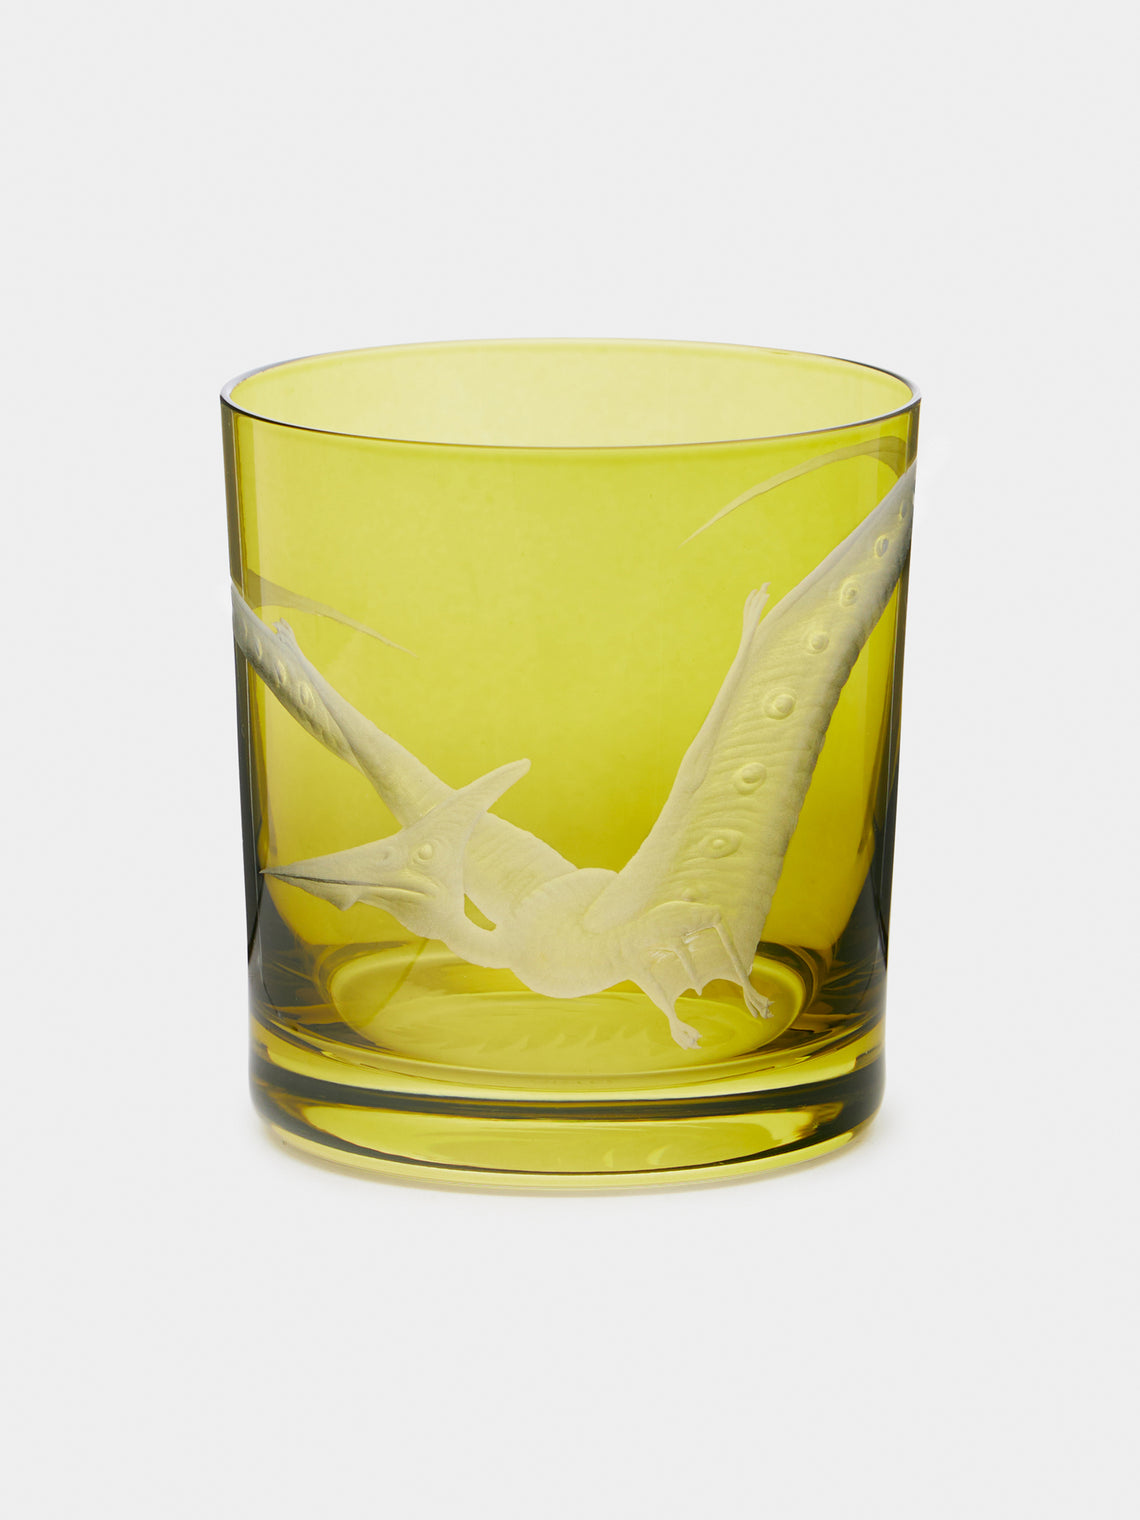 Artel - Hand-Engraved Pterodactyl Crystal Glass - Olive - ABASK - 